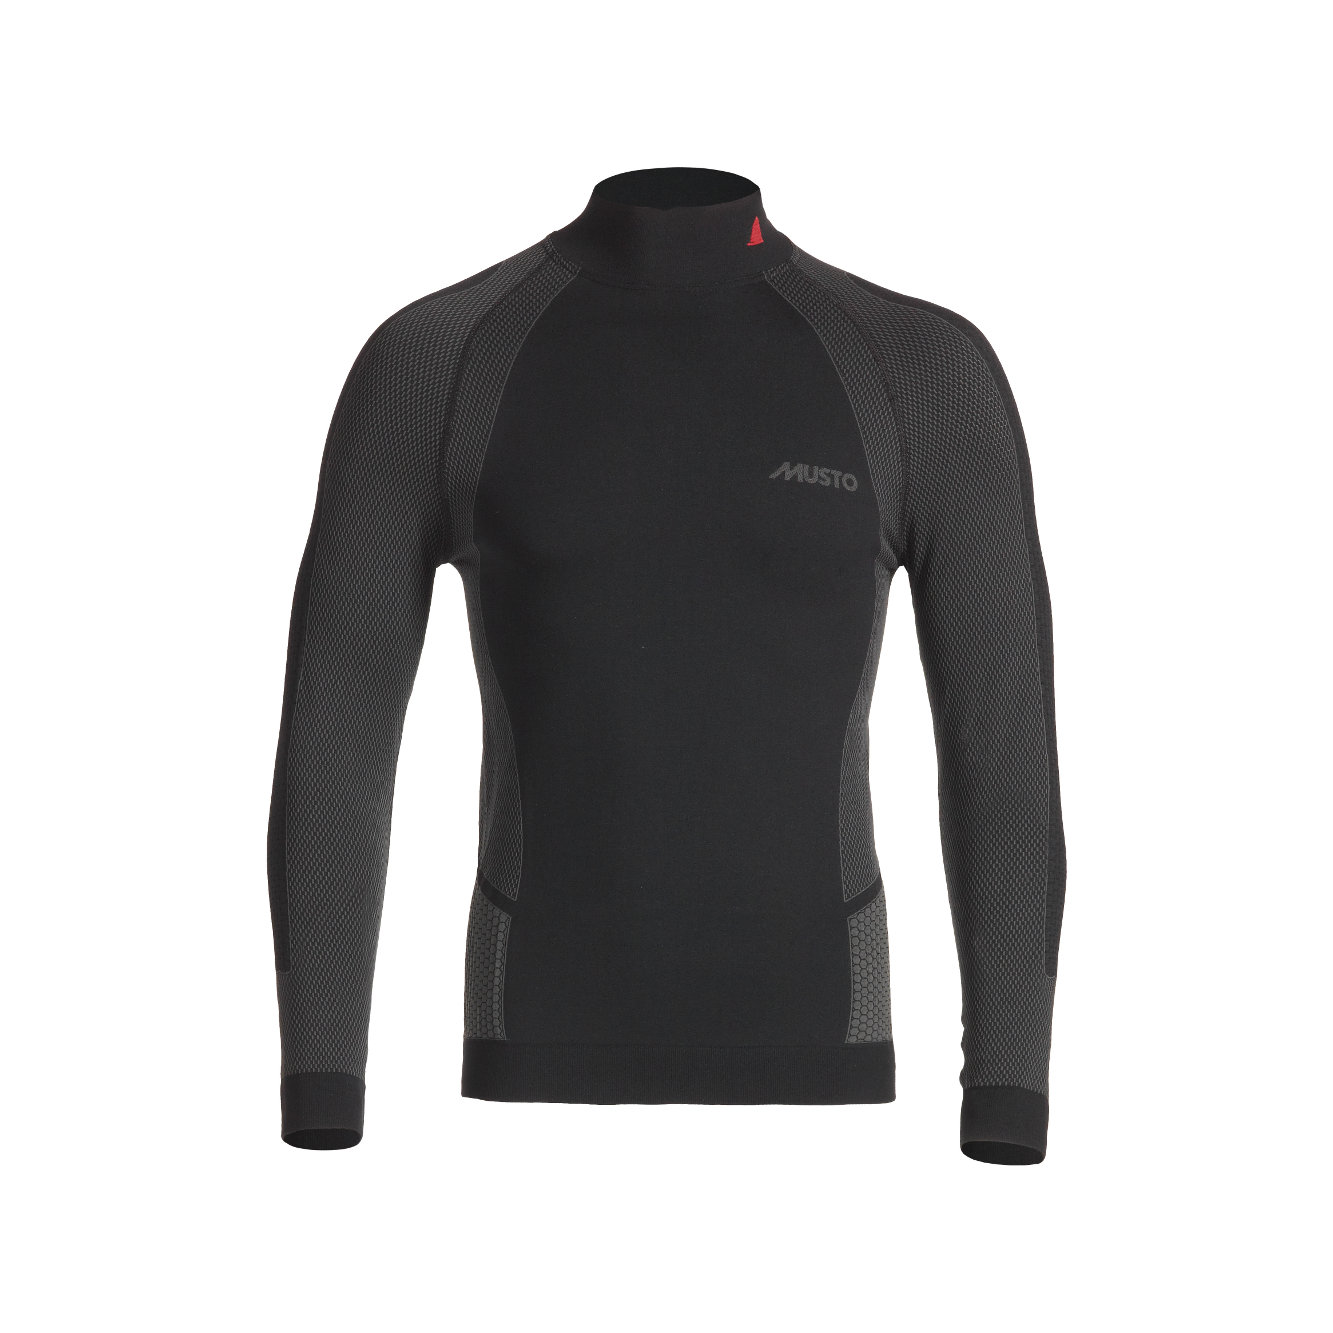 Musto Active Base-Layer T-shirt manches longues homme noir, taille XS/S